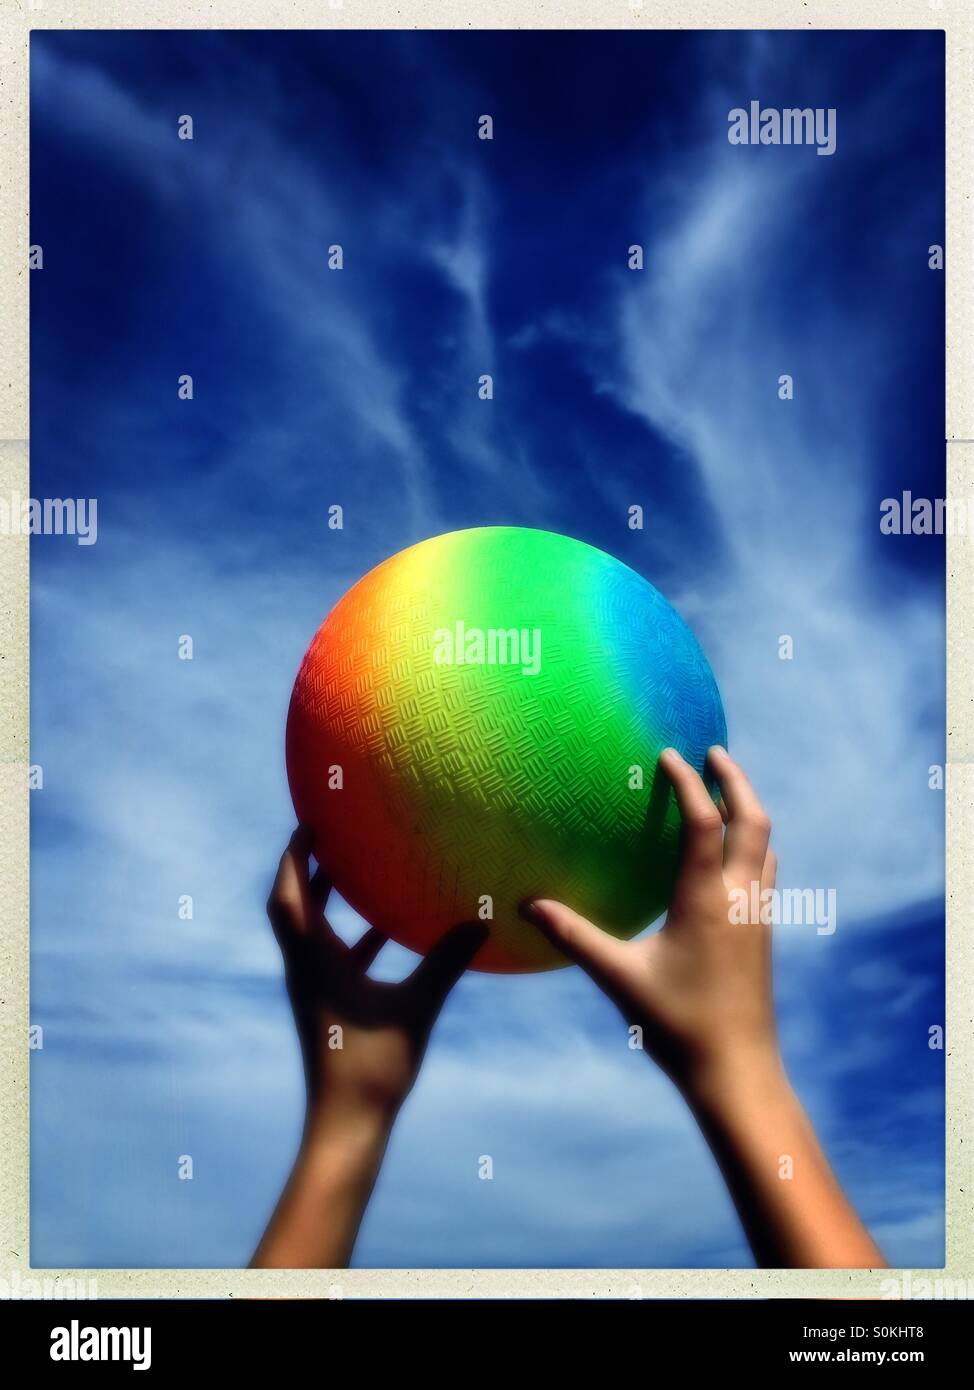 Child reaching for a rainbow colored ball against a deep blue sky. Stock Photo